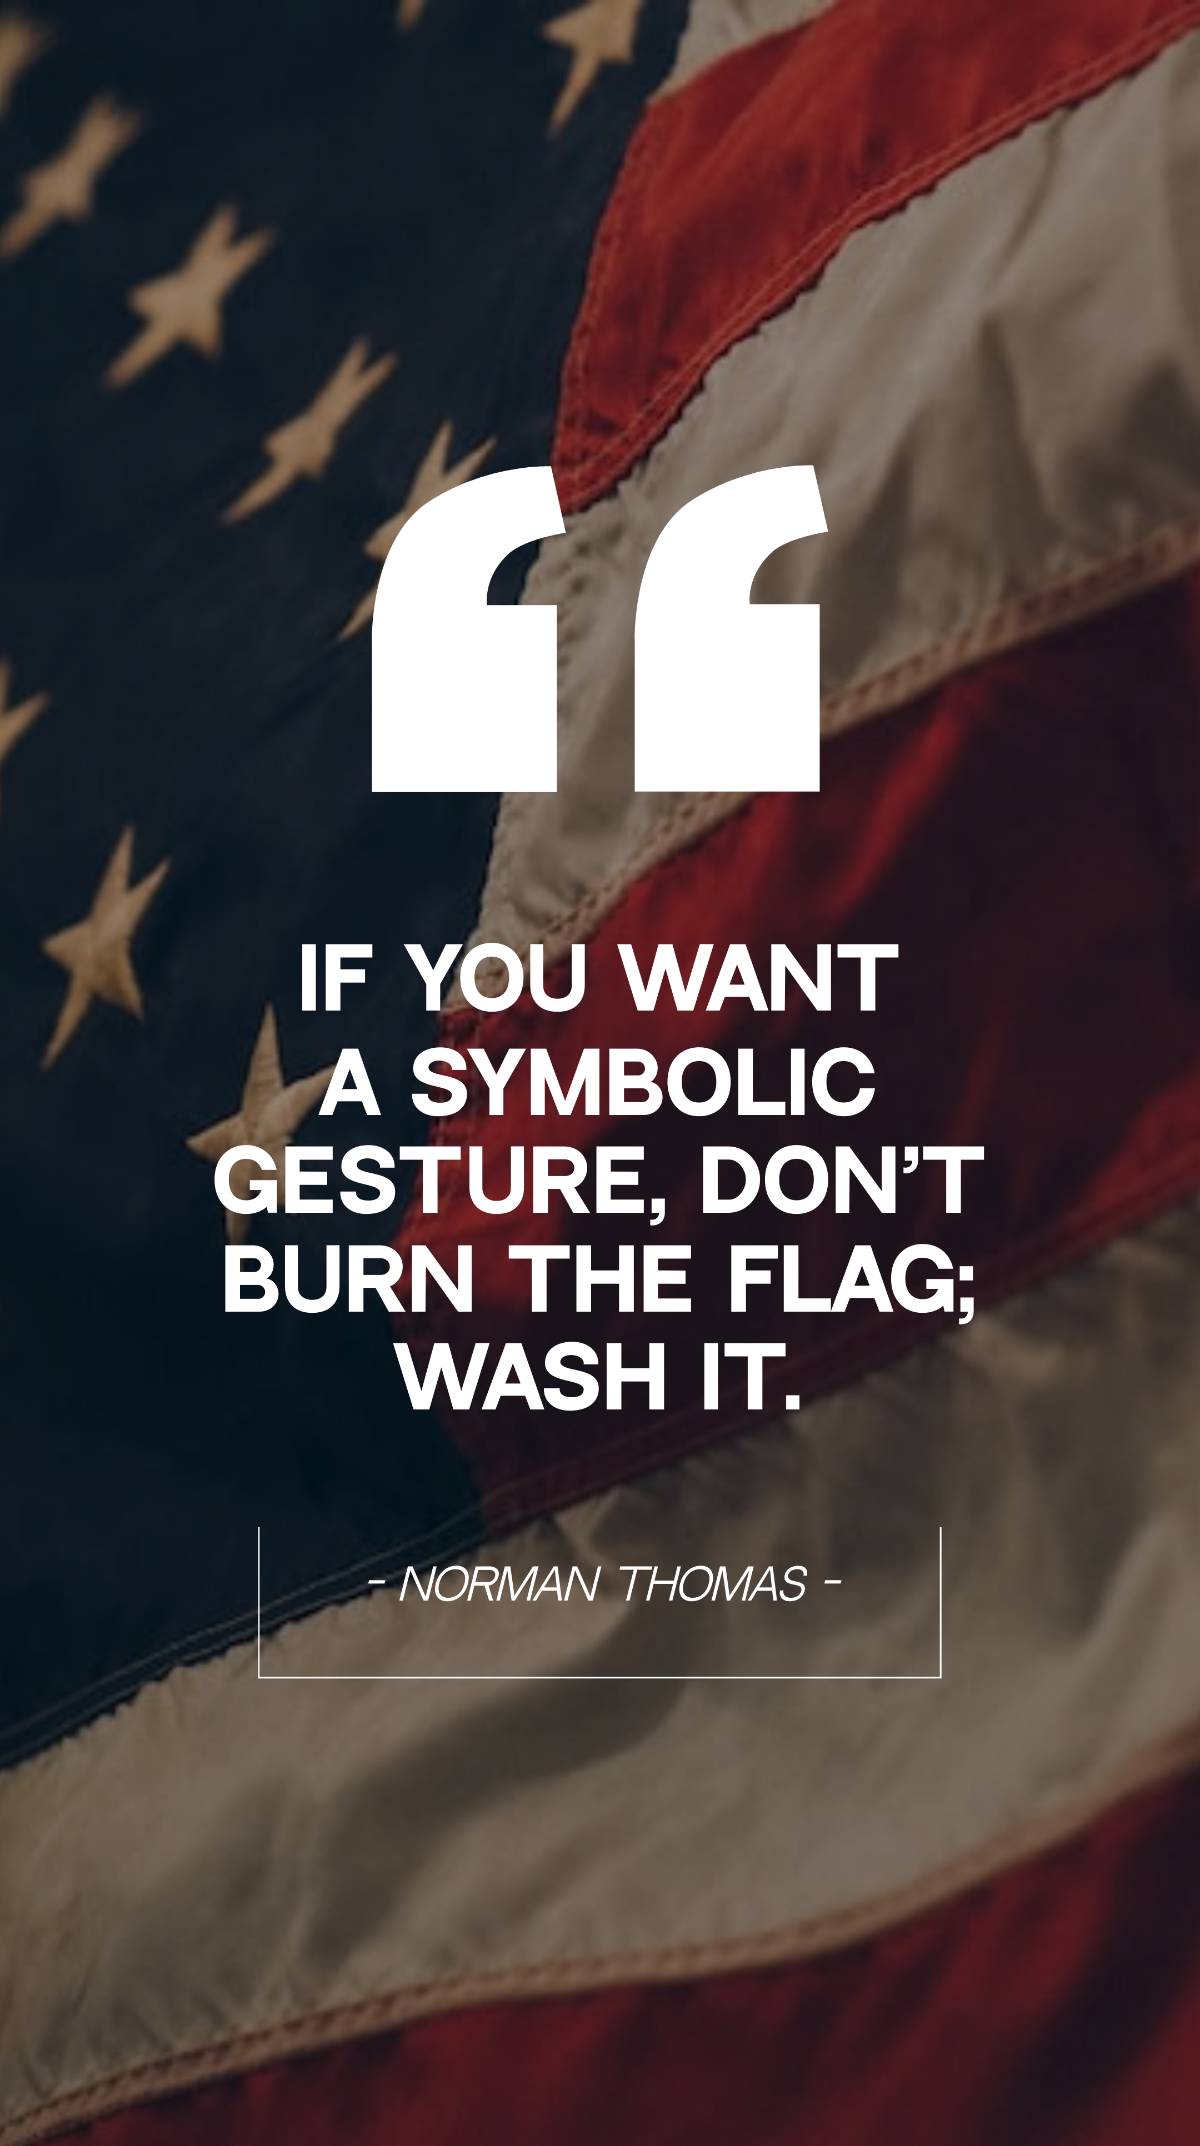 Norman Thomas - If you want a symbolic gesture, don’t burn the flag; wash it.